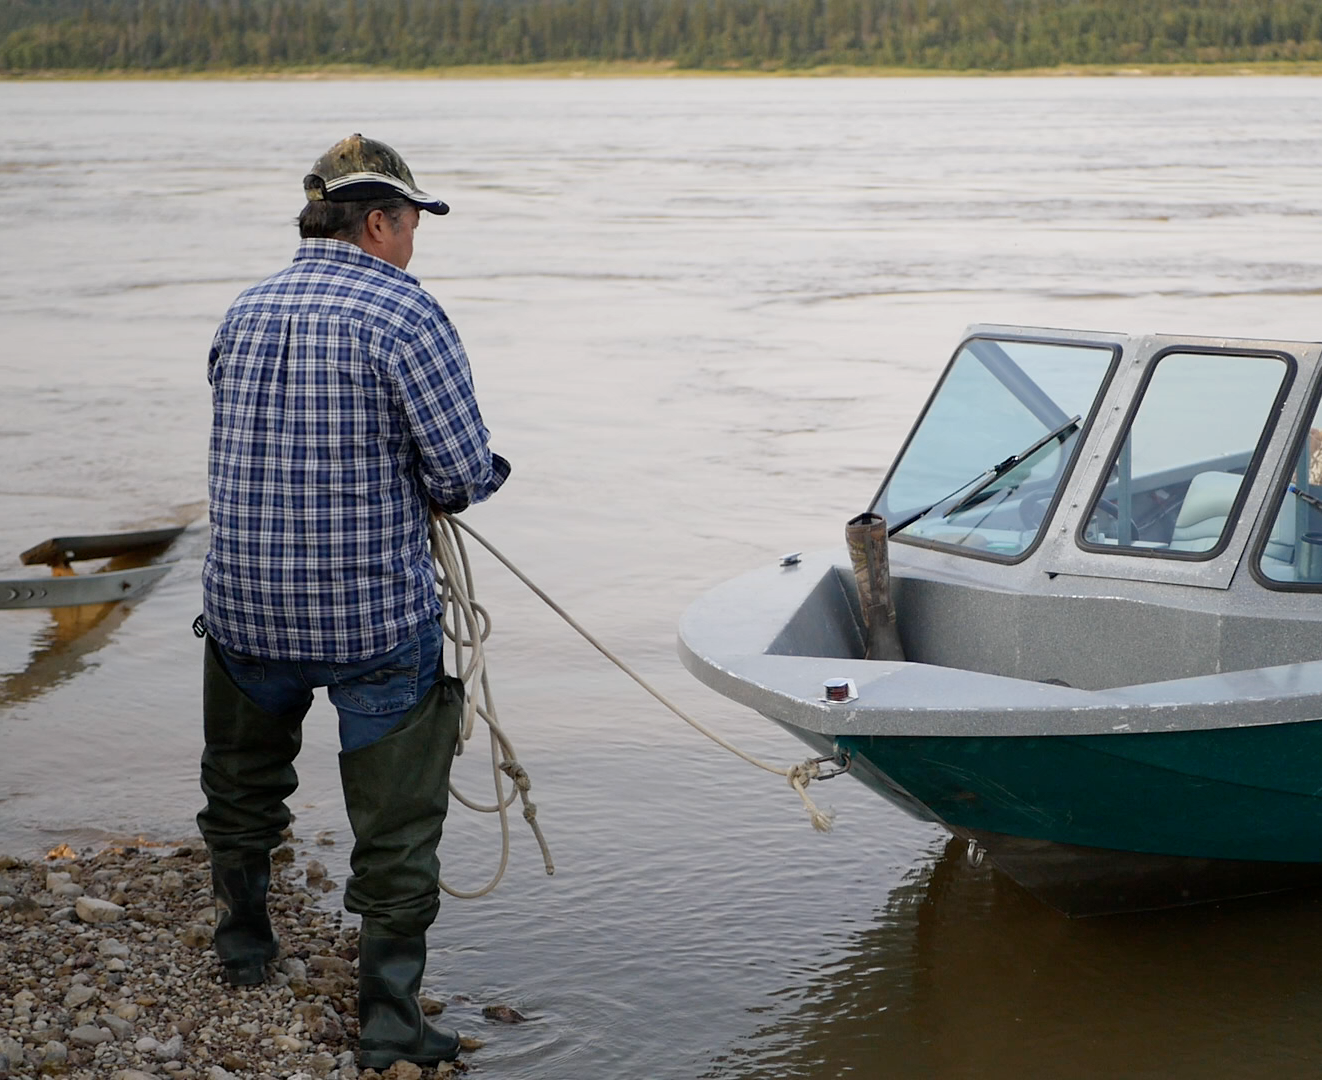 A local man stands ashore with his boat in the water in NWT.